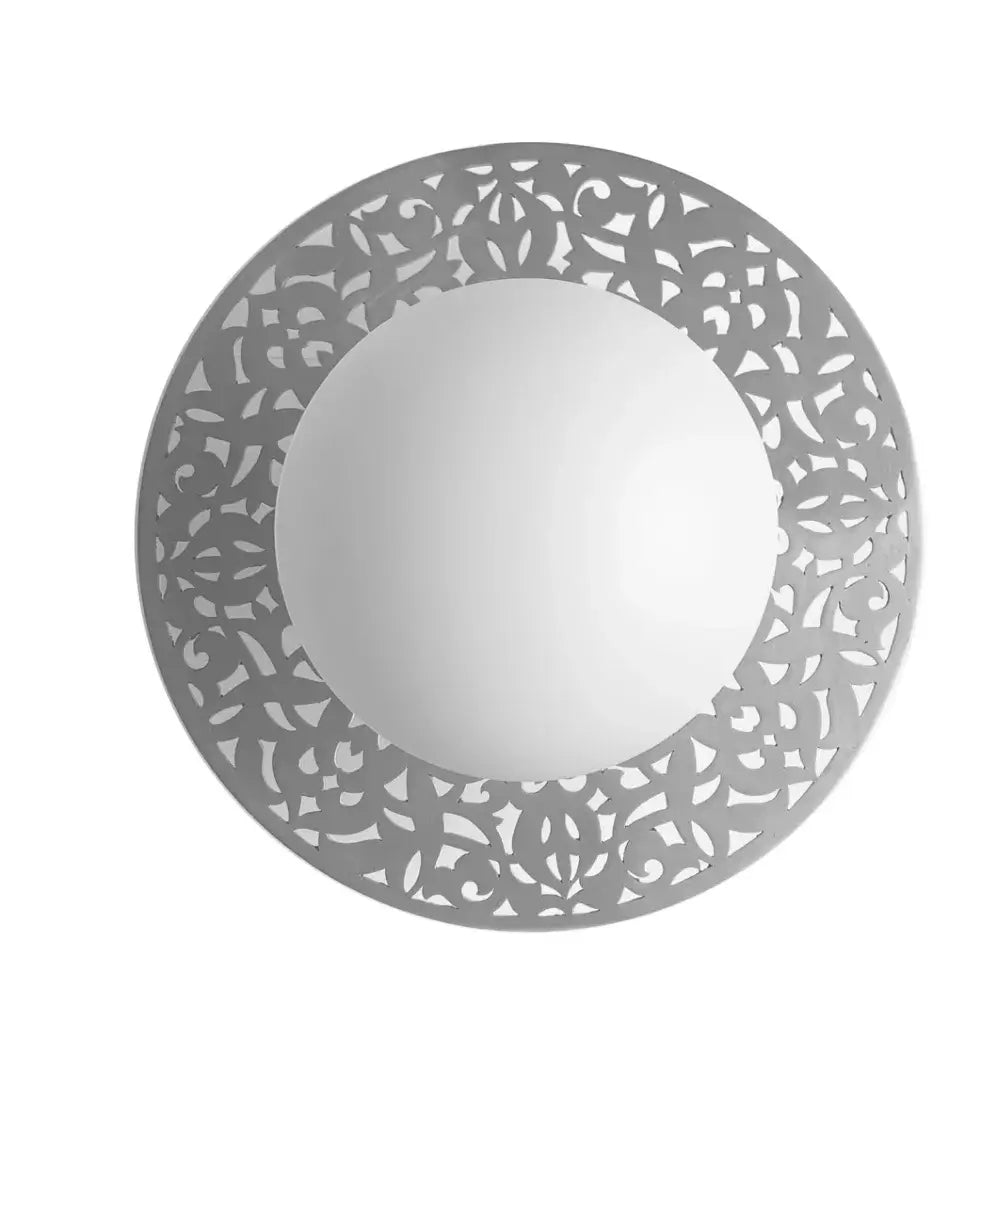 Dounia home Wall scone in nickel silver  made of Metal, Model: Riad